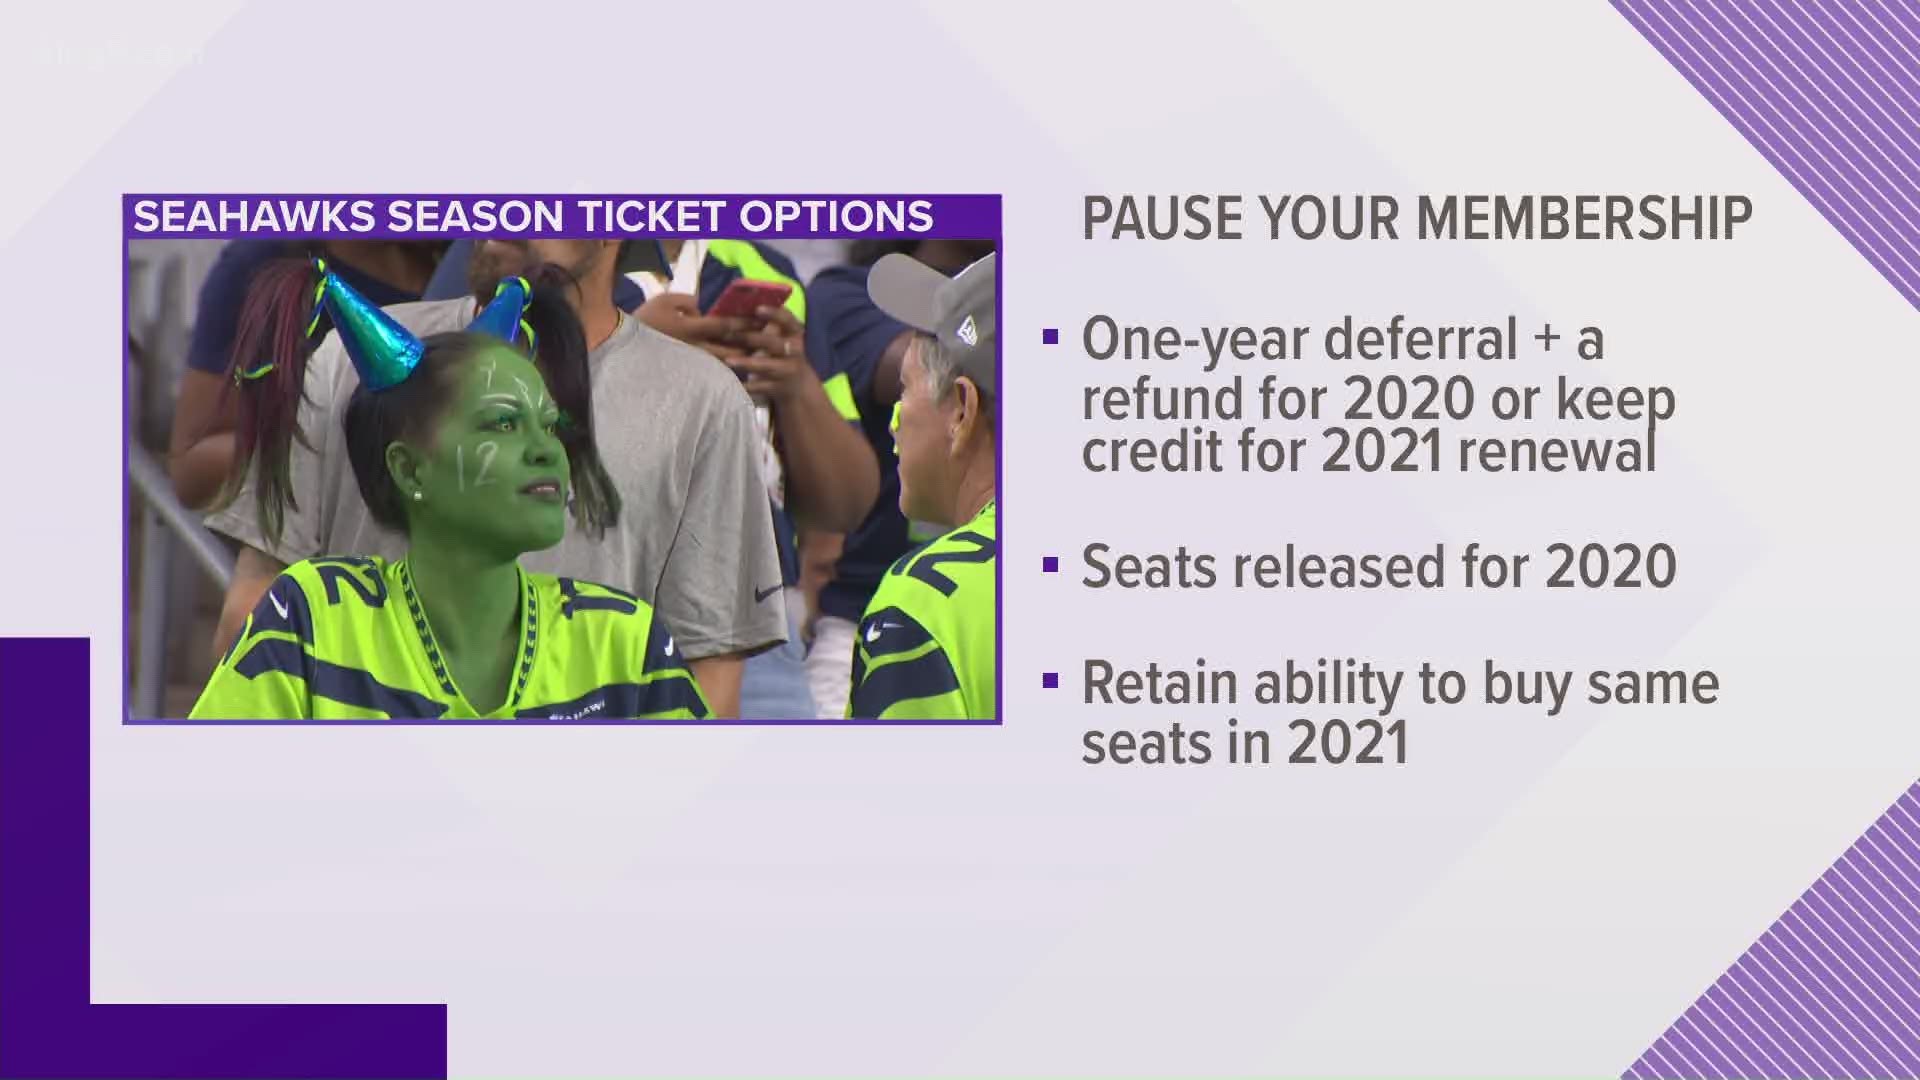 Due to the uncertainty of the NFL season, Seahawks season ticket holders may request a refund or keep credit on account for 2021 renewal.